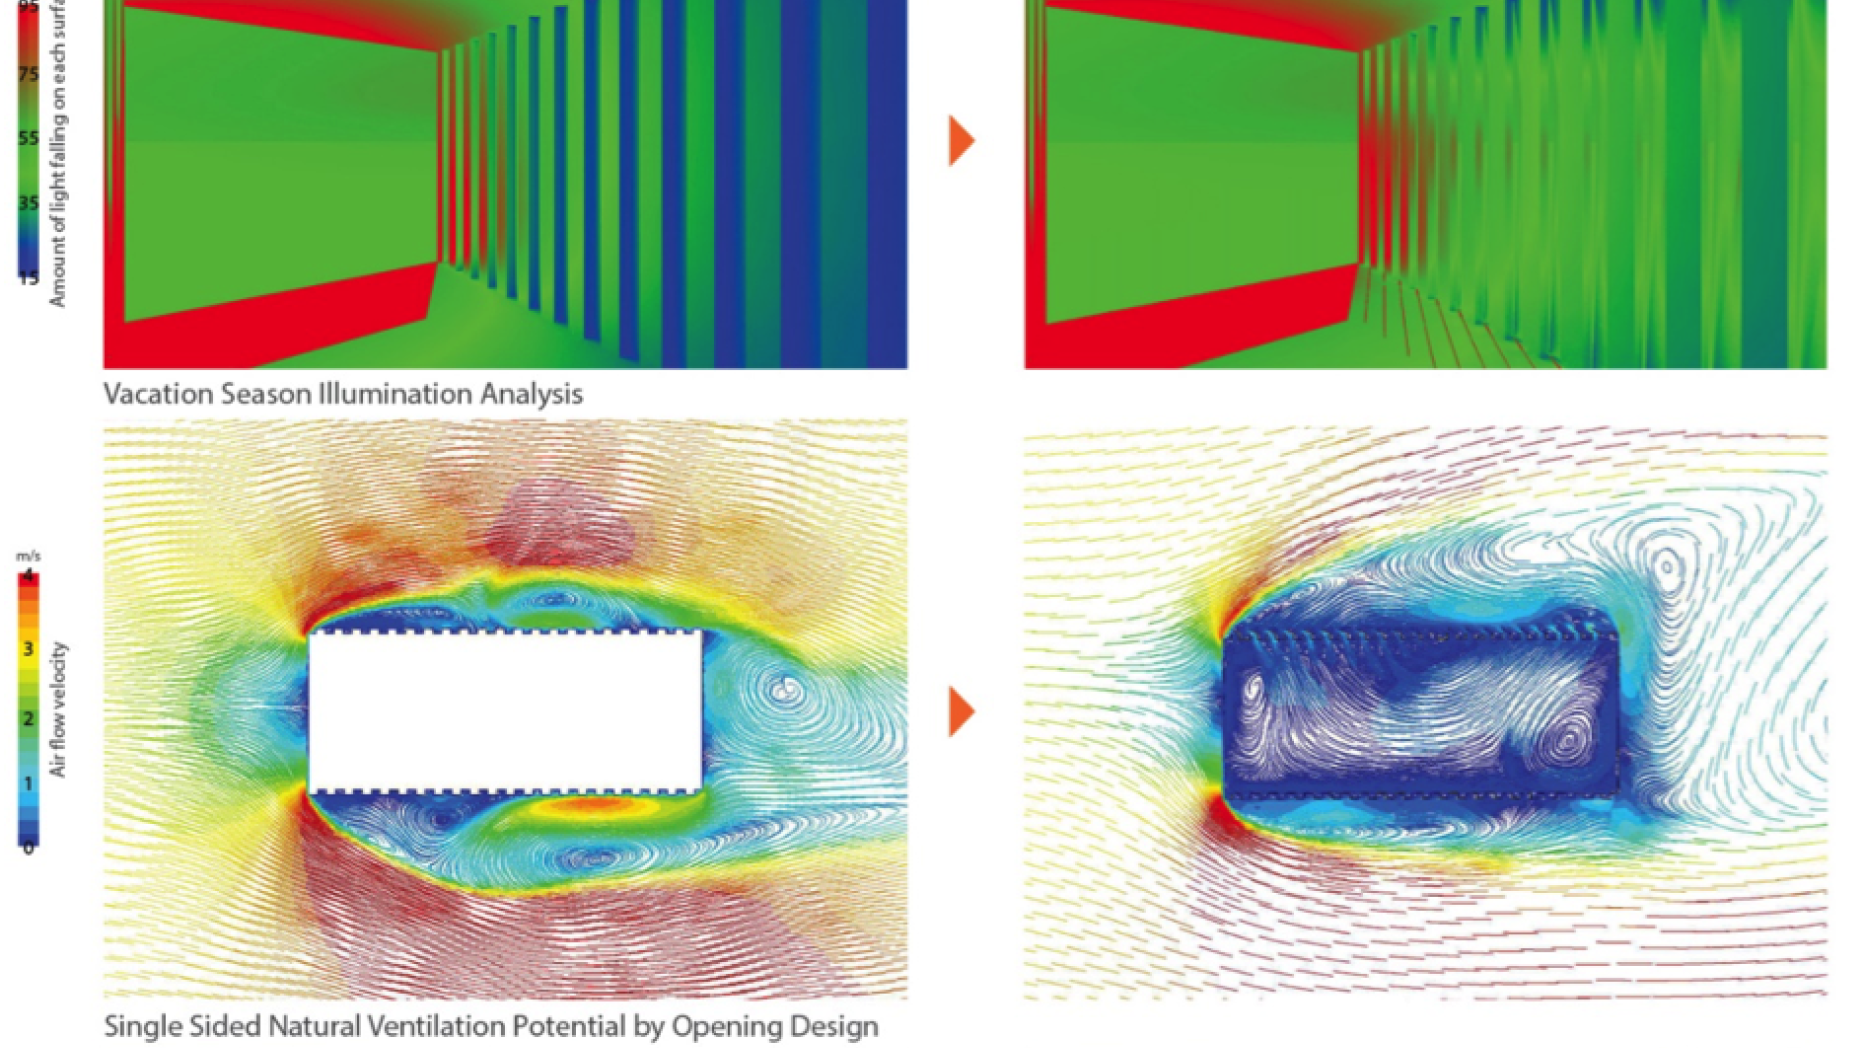 Performance Assessments for Design Changes with Daylighting and CFD Simulation, ISOENV, 2013